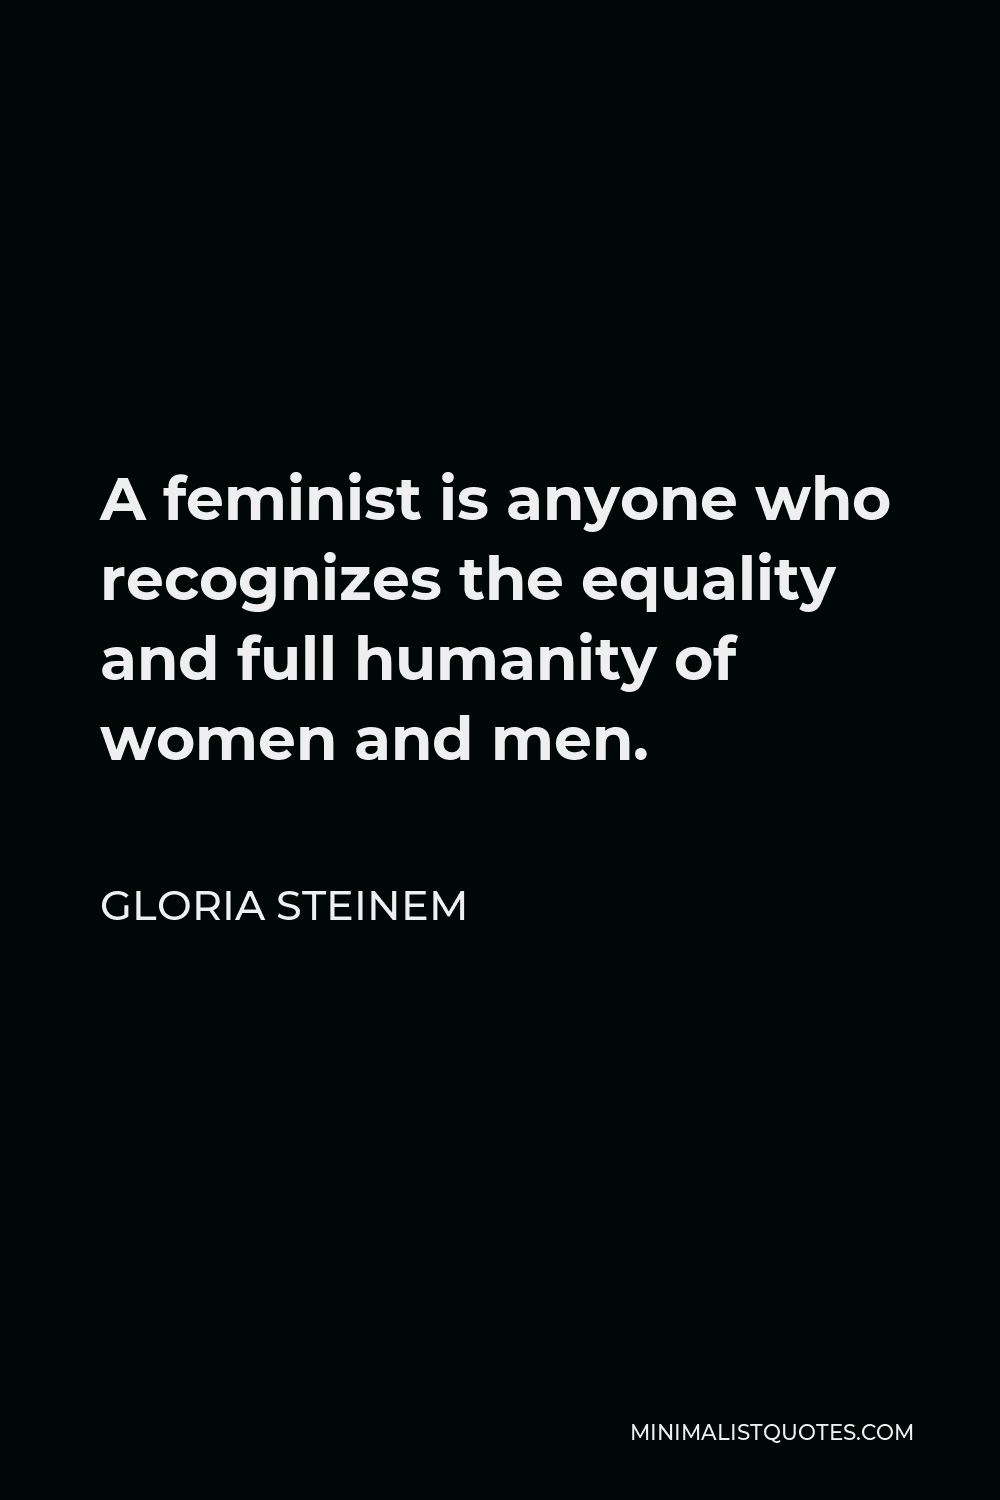 Gloria Steinem Quote - A feminist is anyone who recognizes the equality and full humanity of women and men.